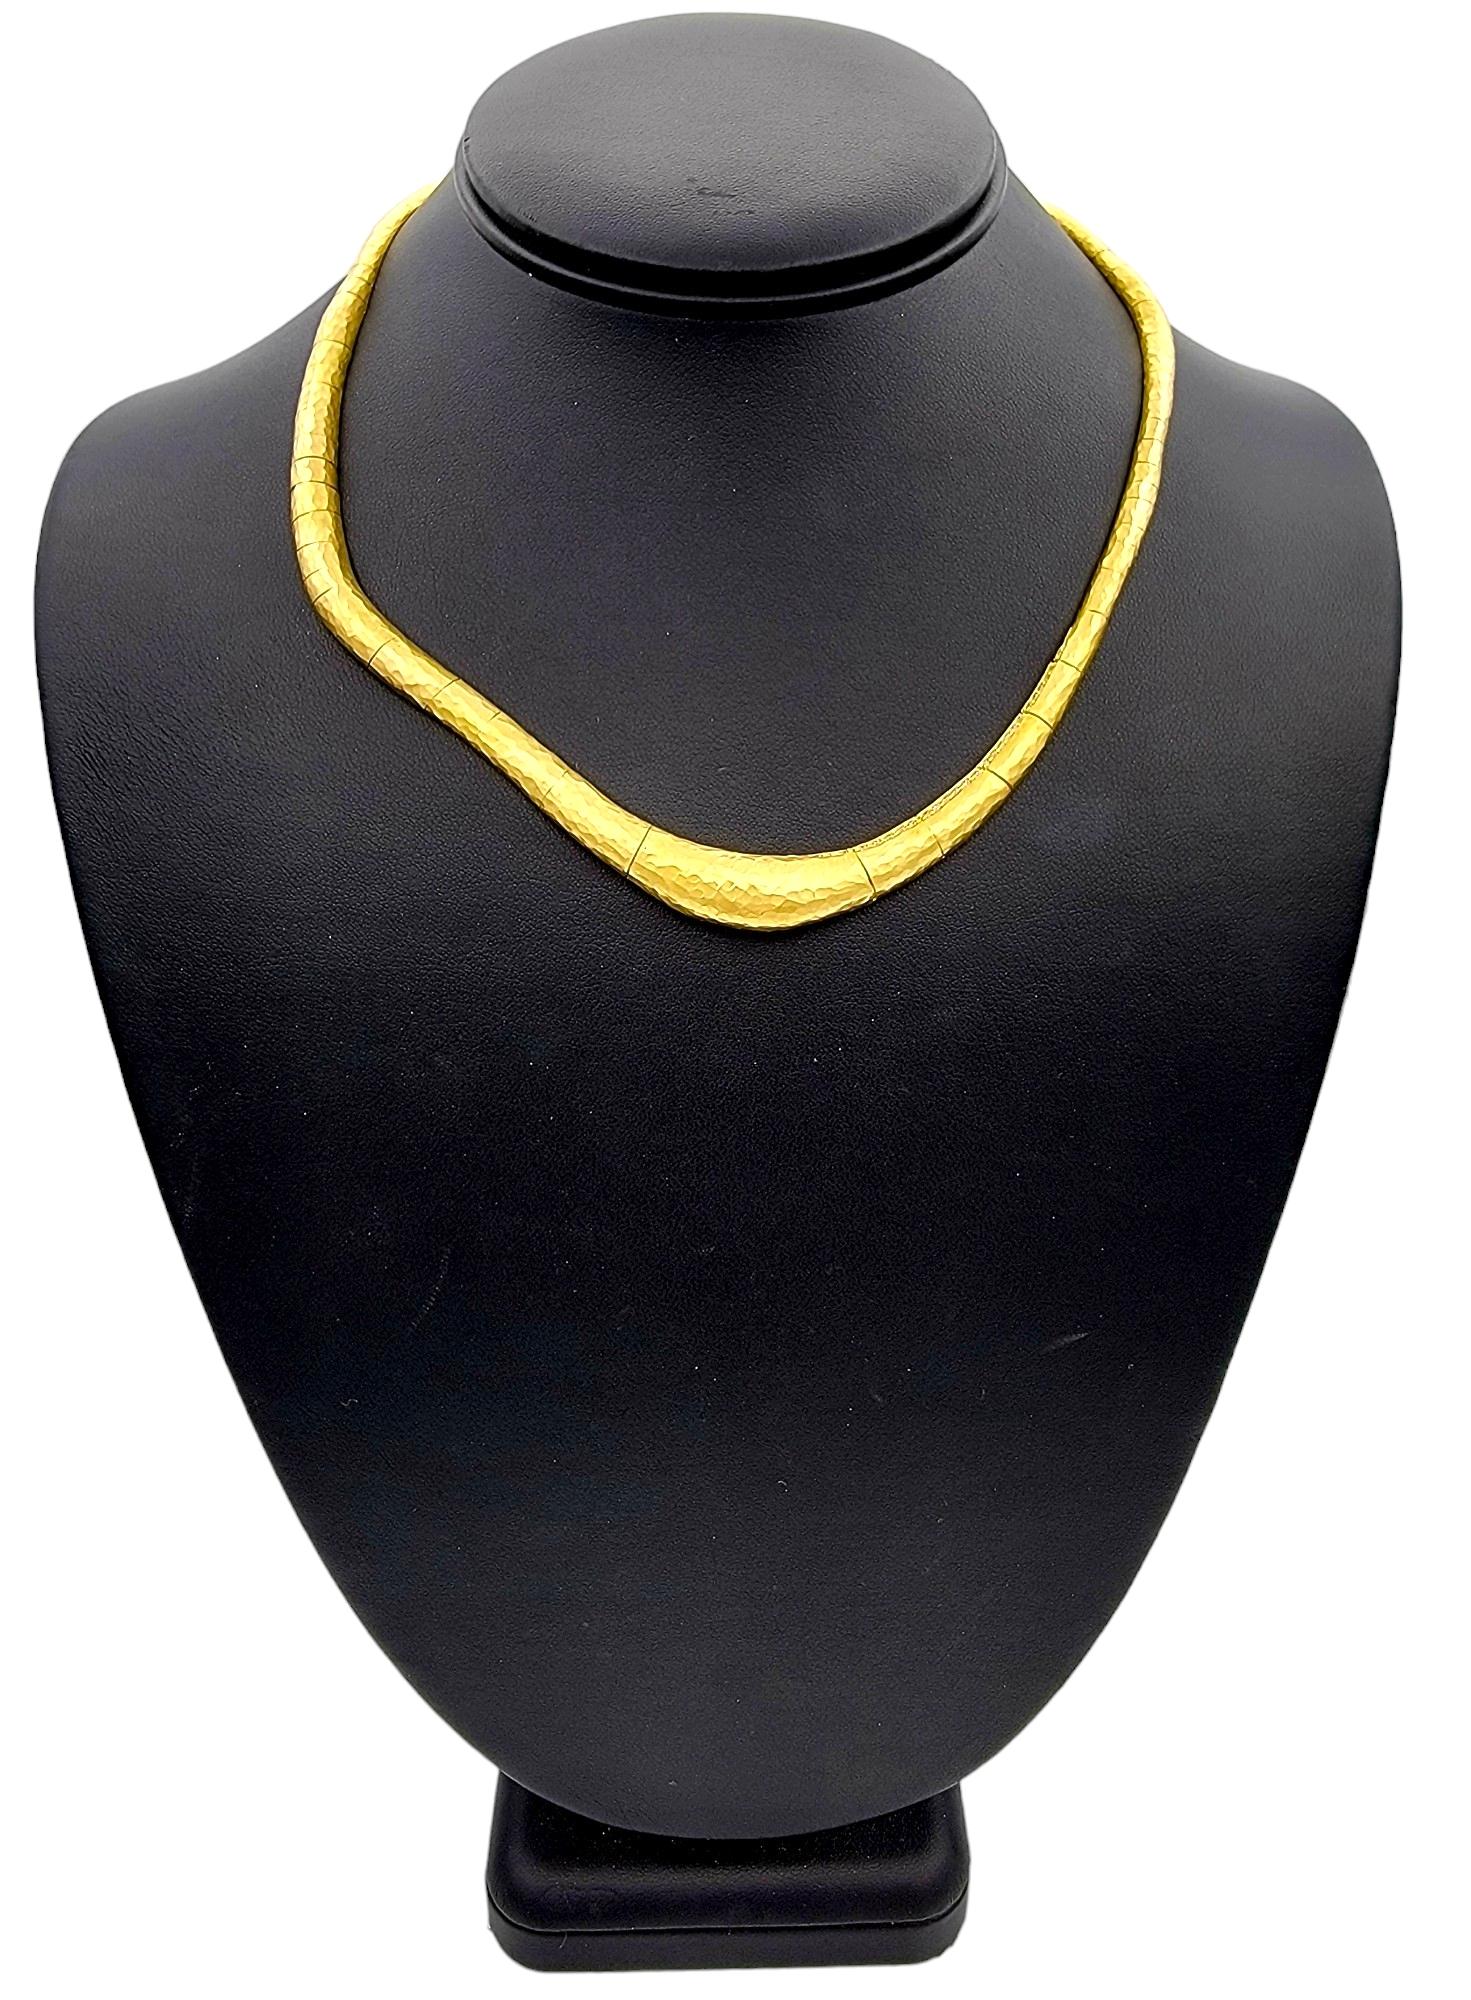 H. Stern Hammered Diamond Collar Link Necklace Set in 18 Karat Yellow Gold For Sale 4